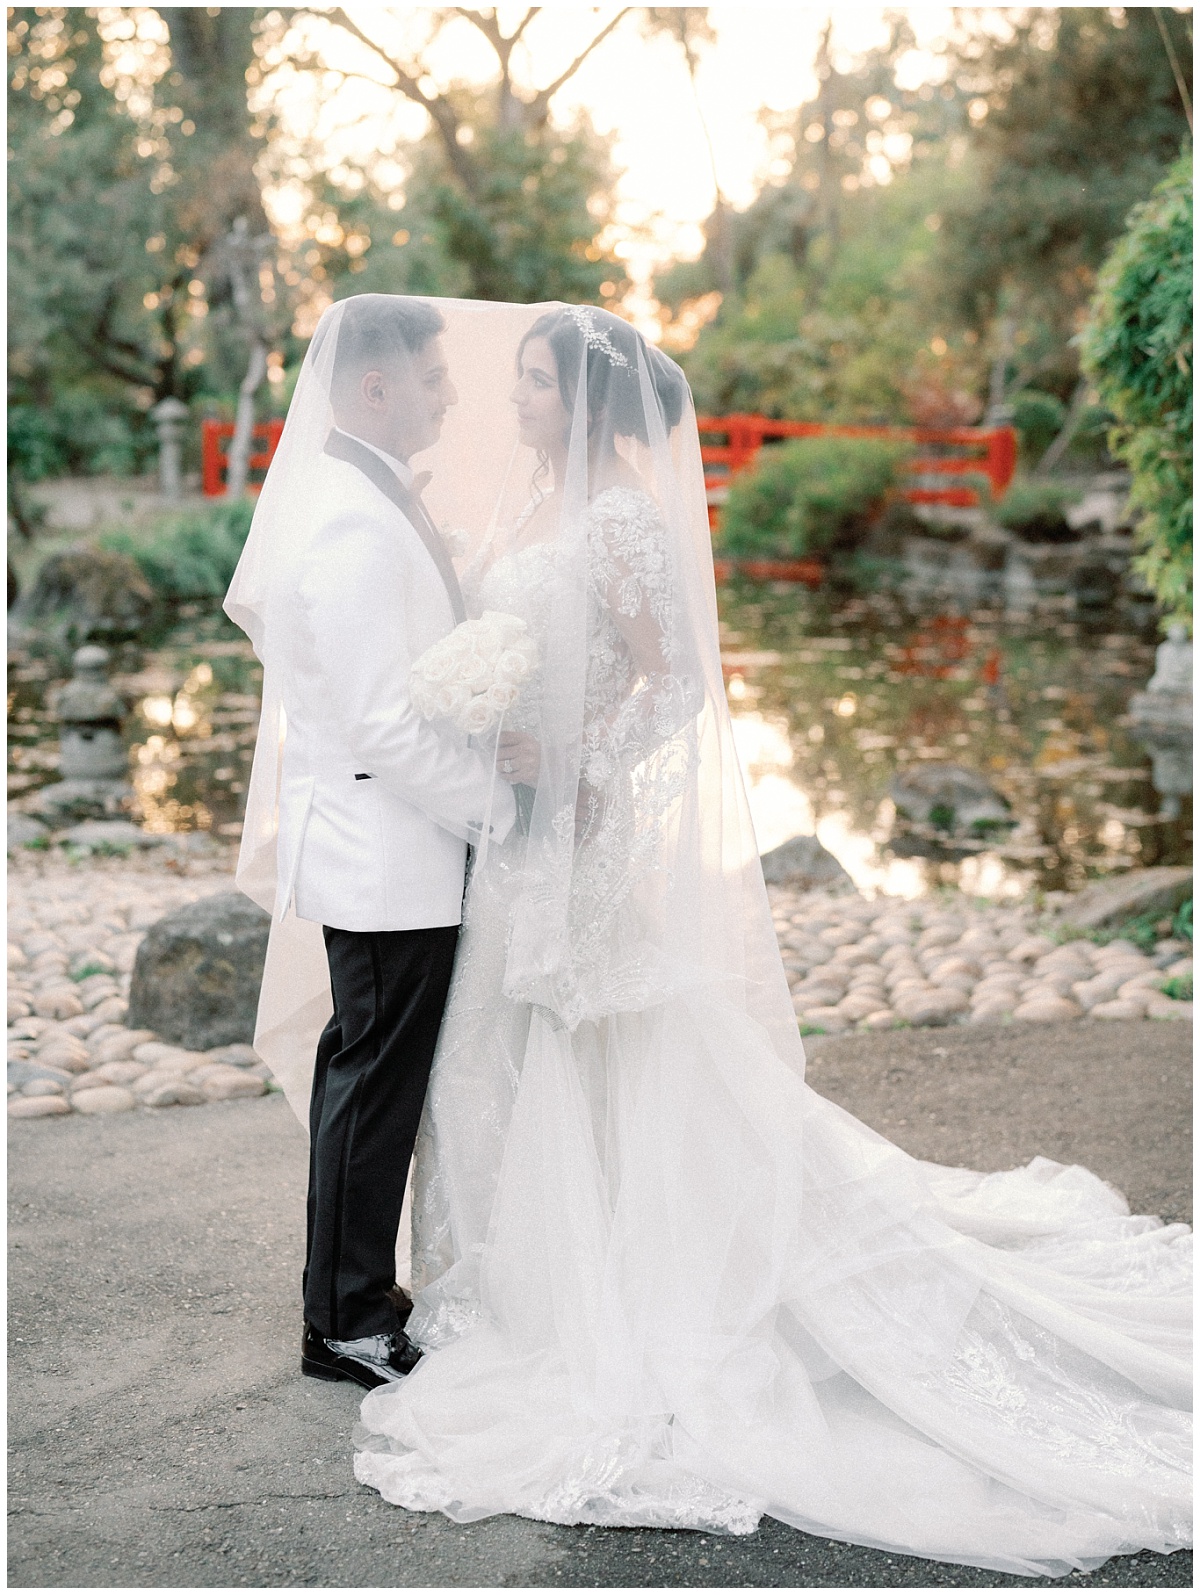 Timeless Veil Portraits of Bride and Groom